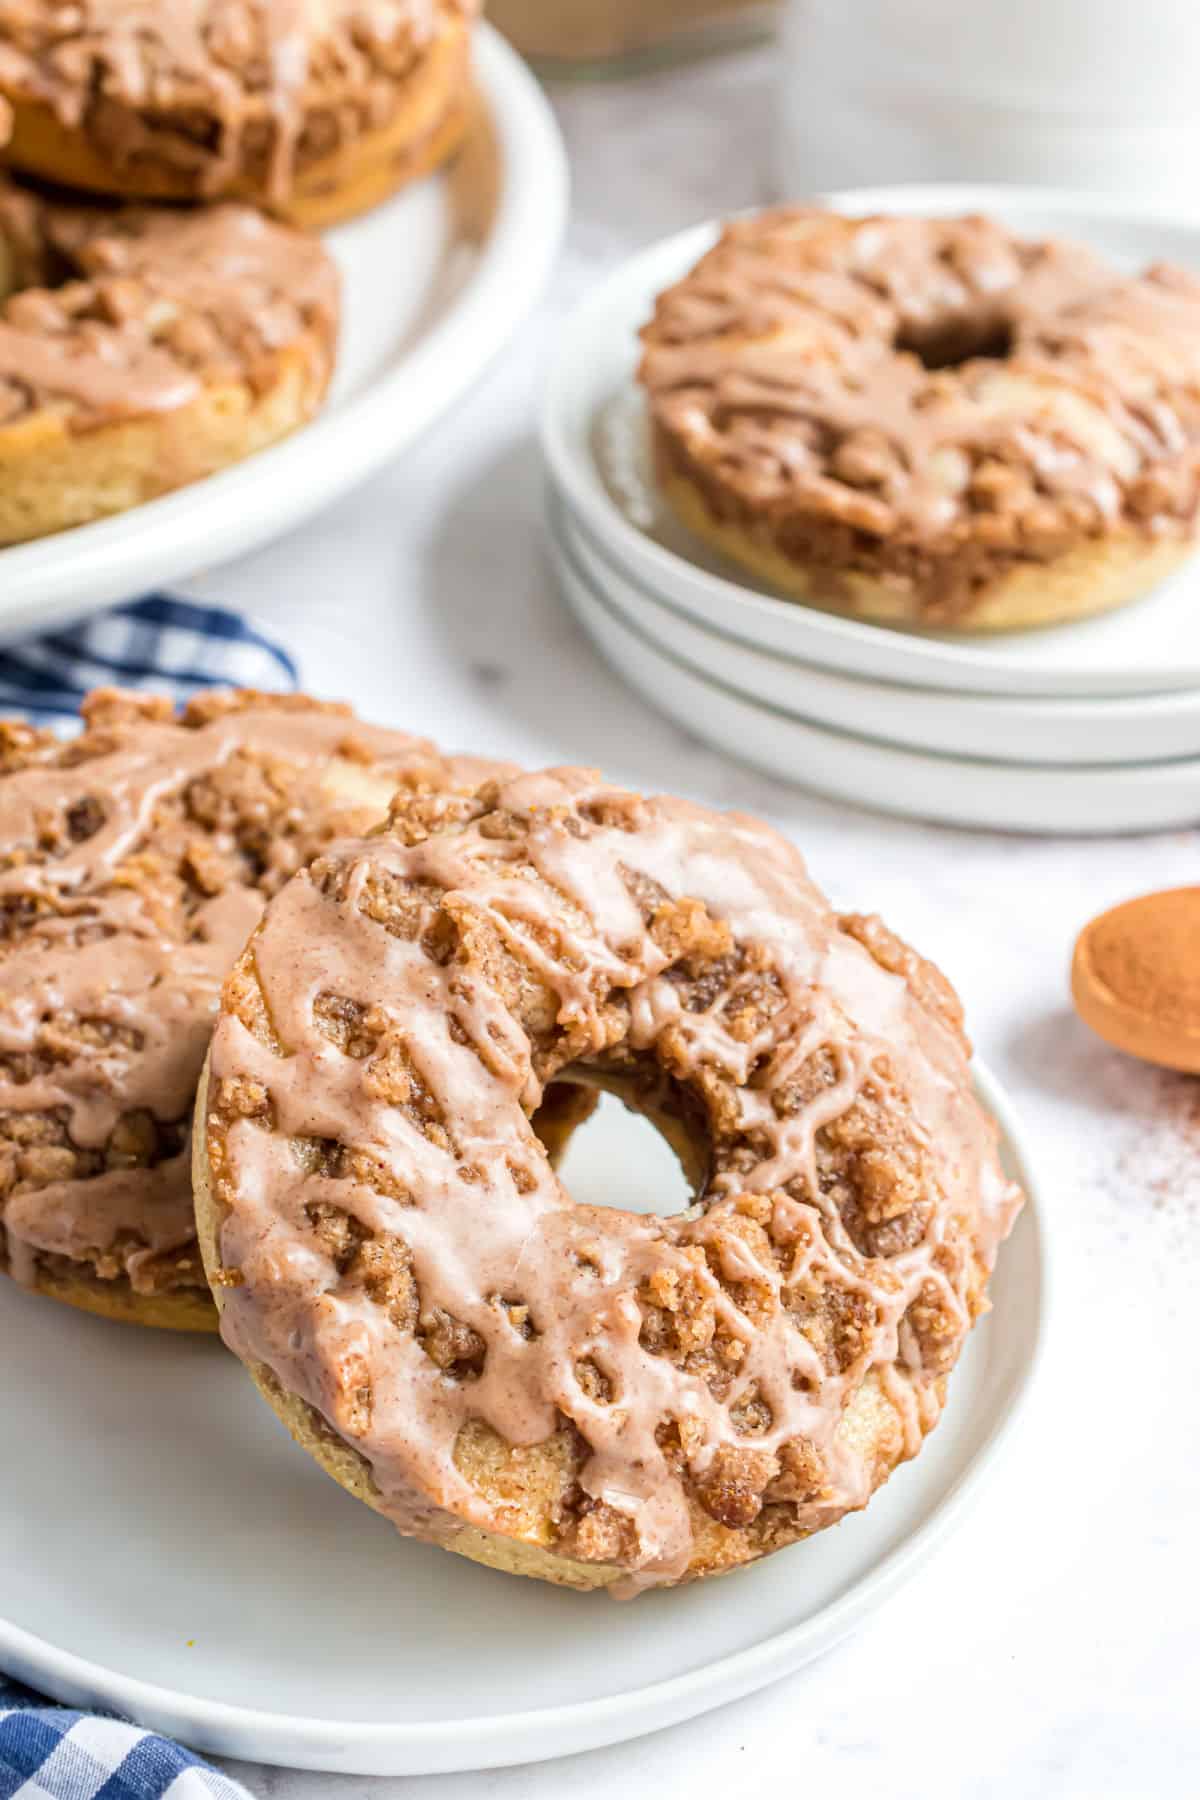 Cinnamon donuts with streusel on a white plate.